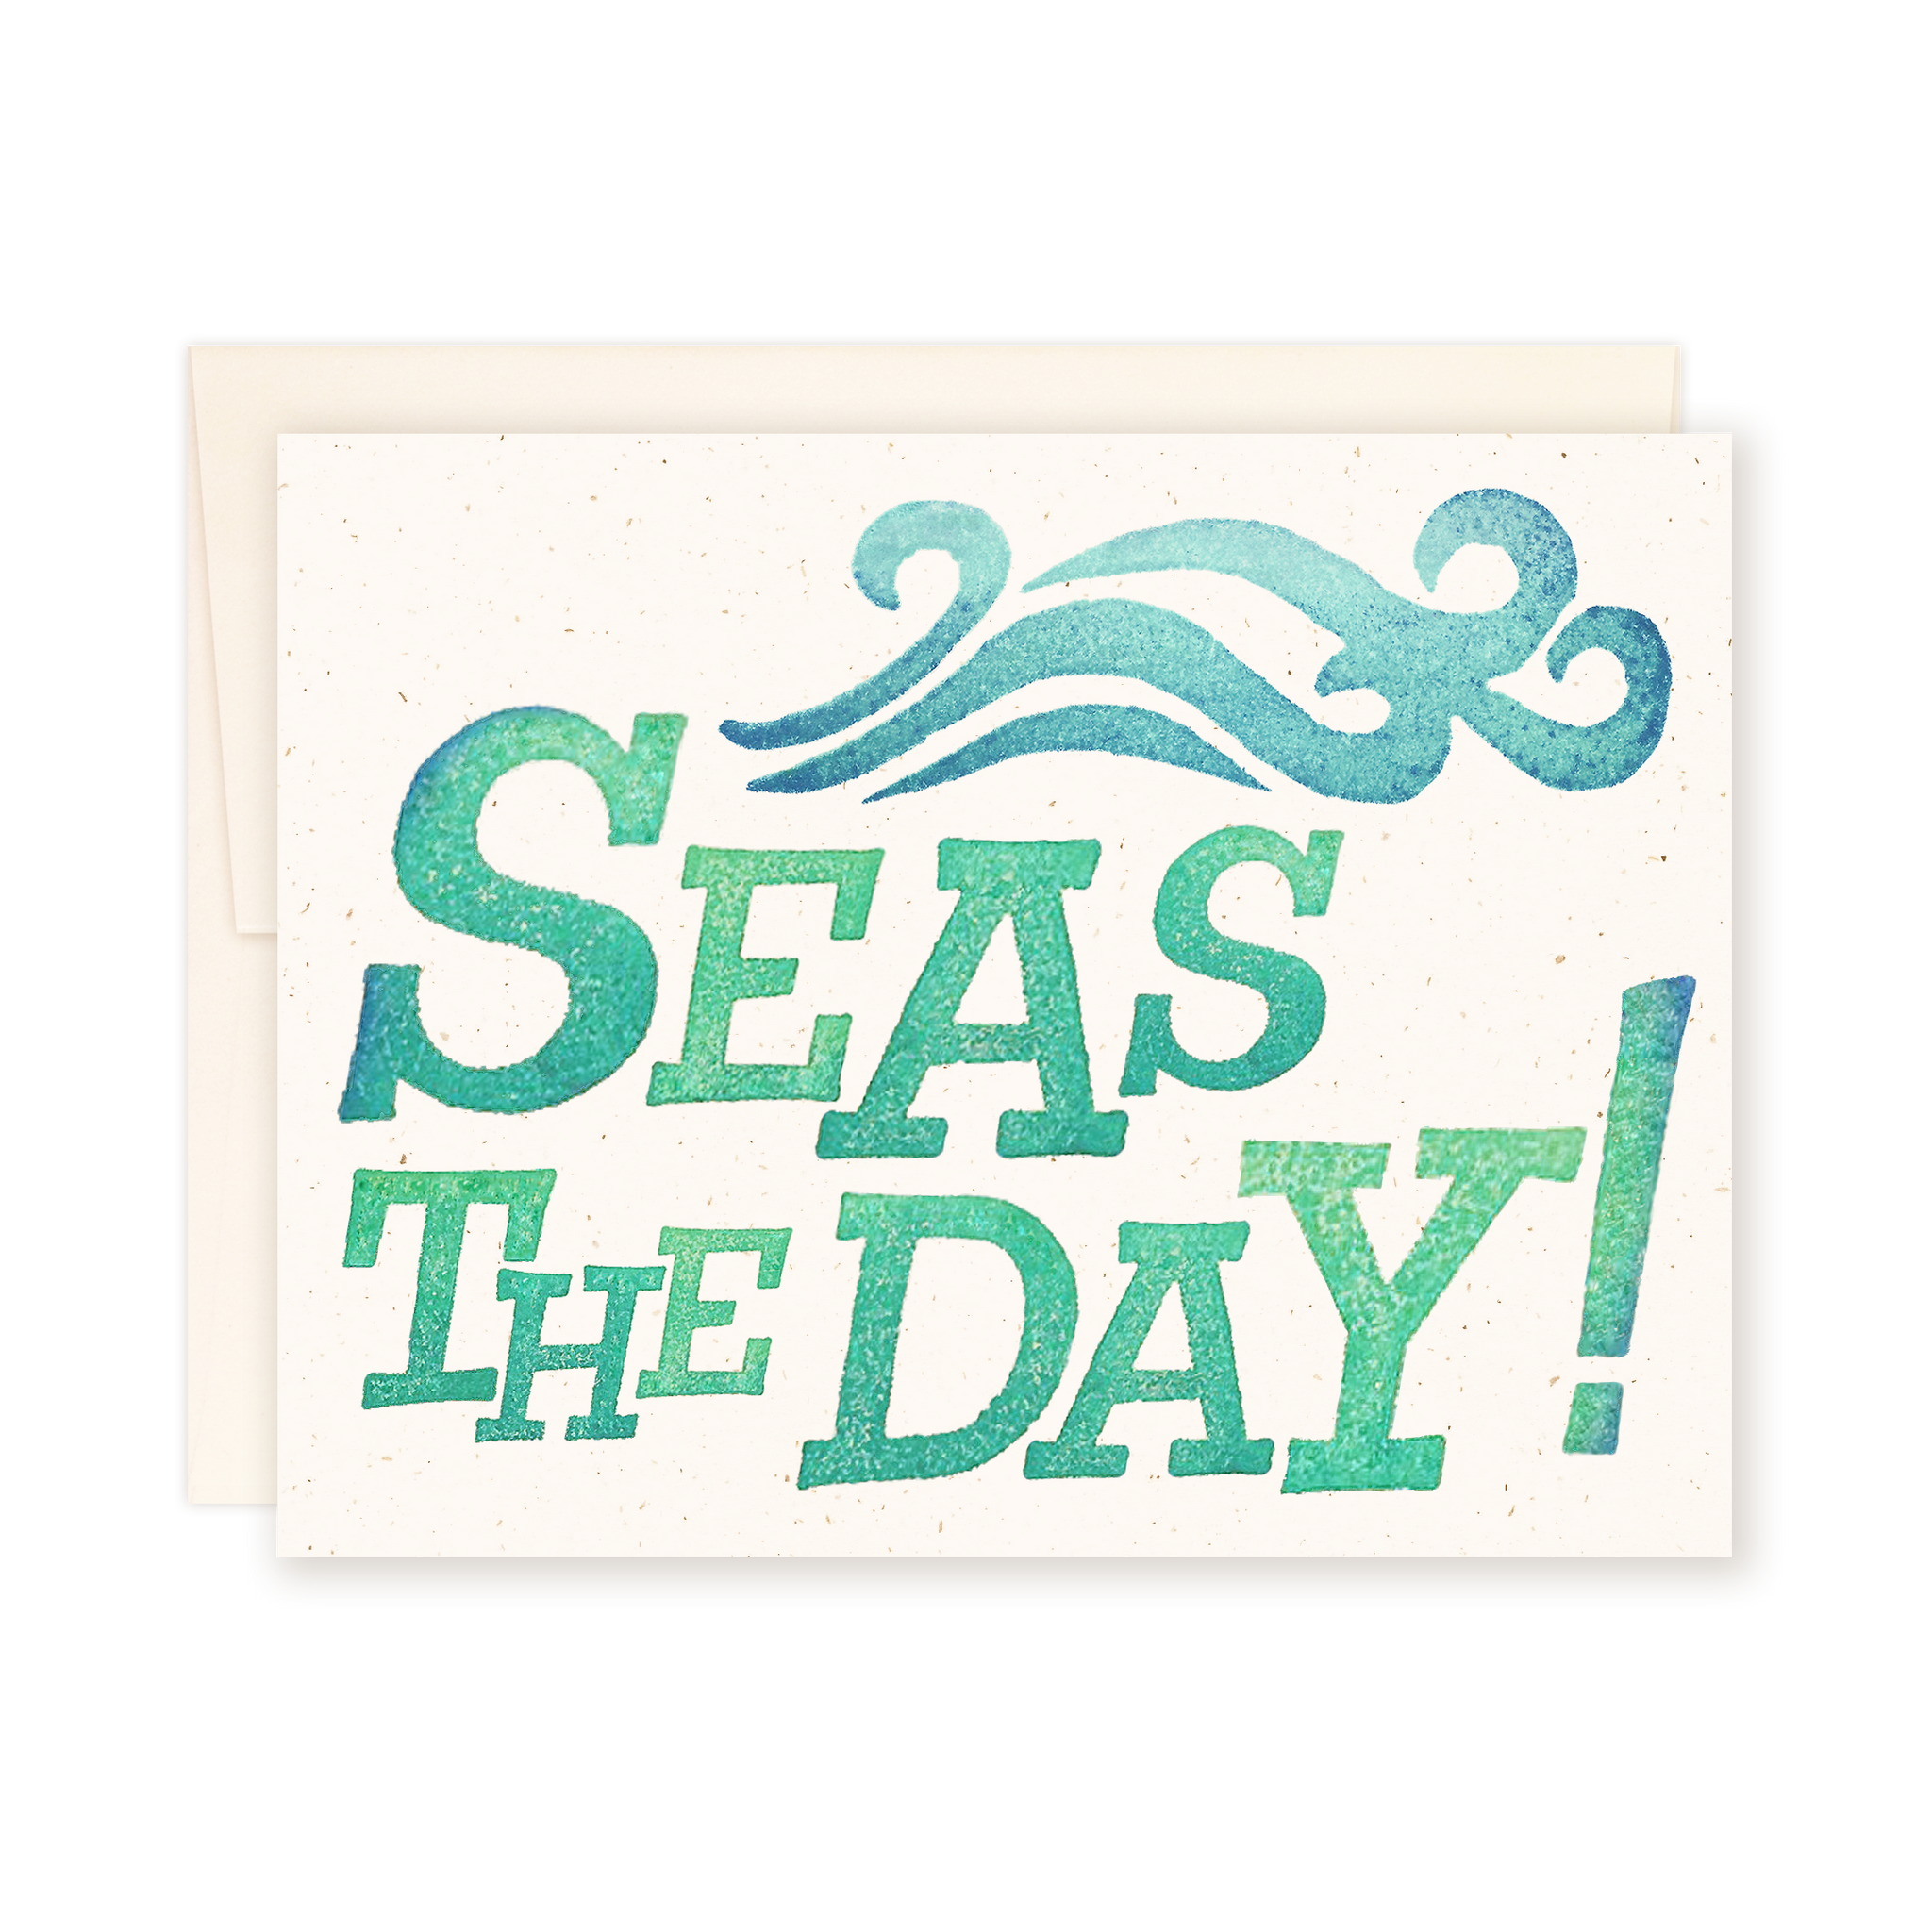 Seas the Day Card